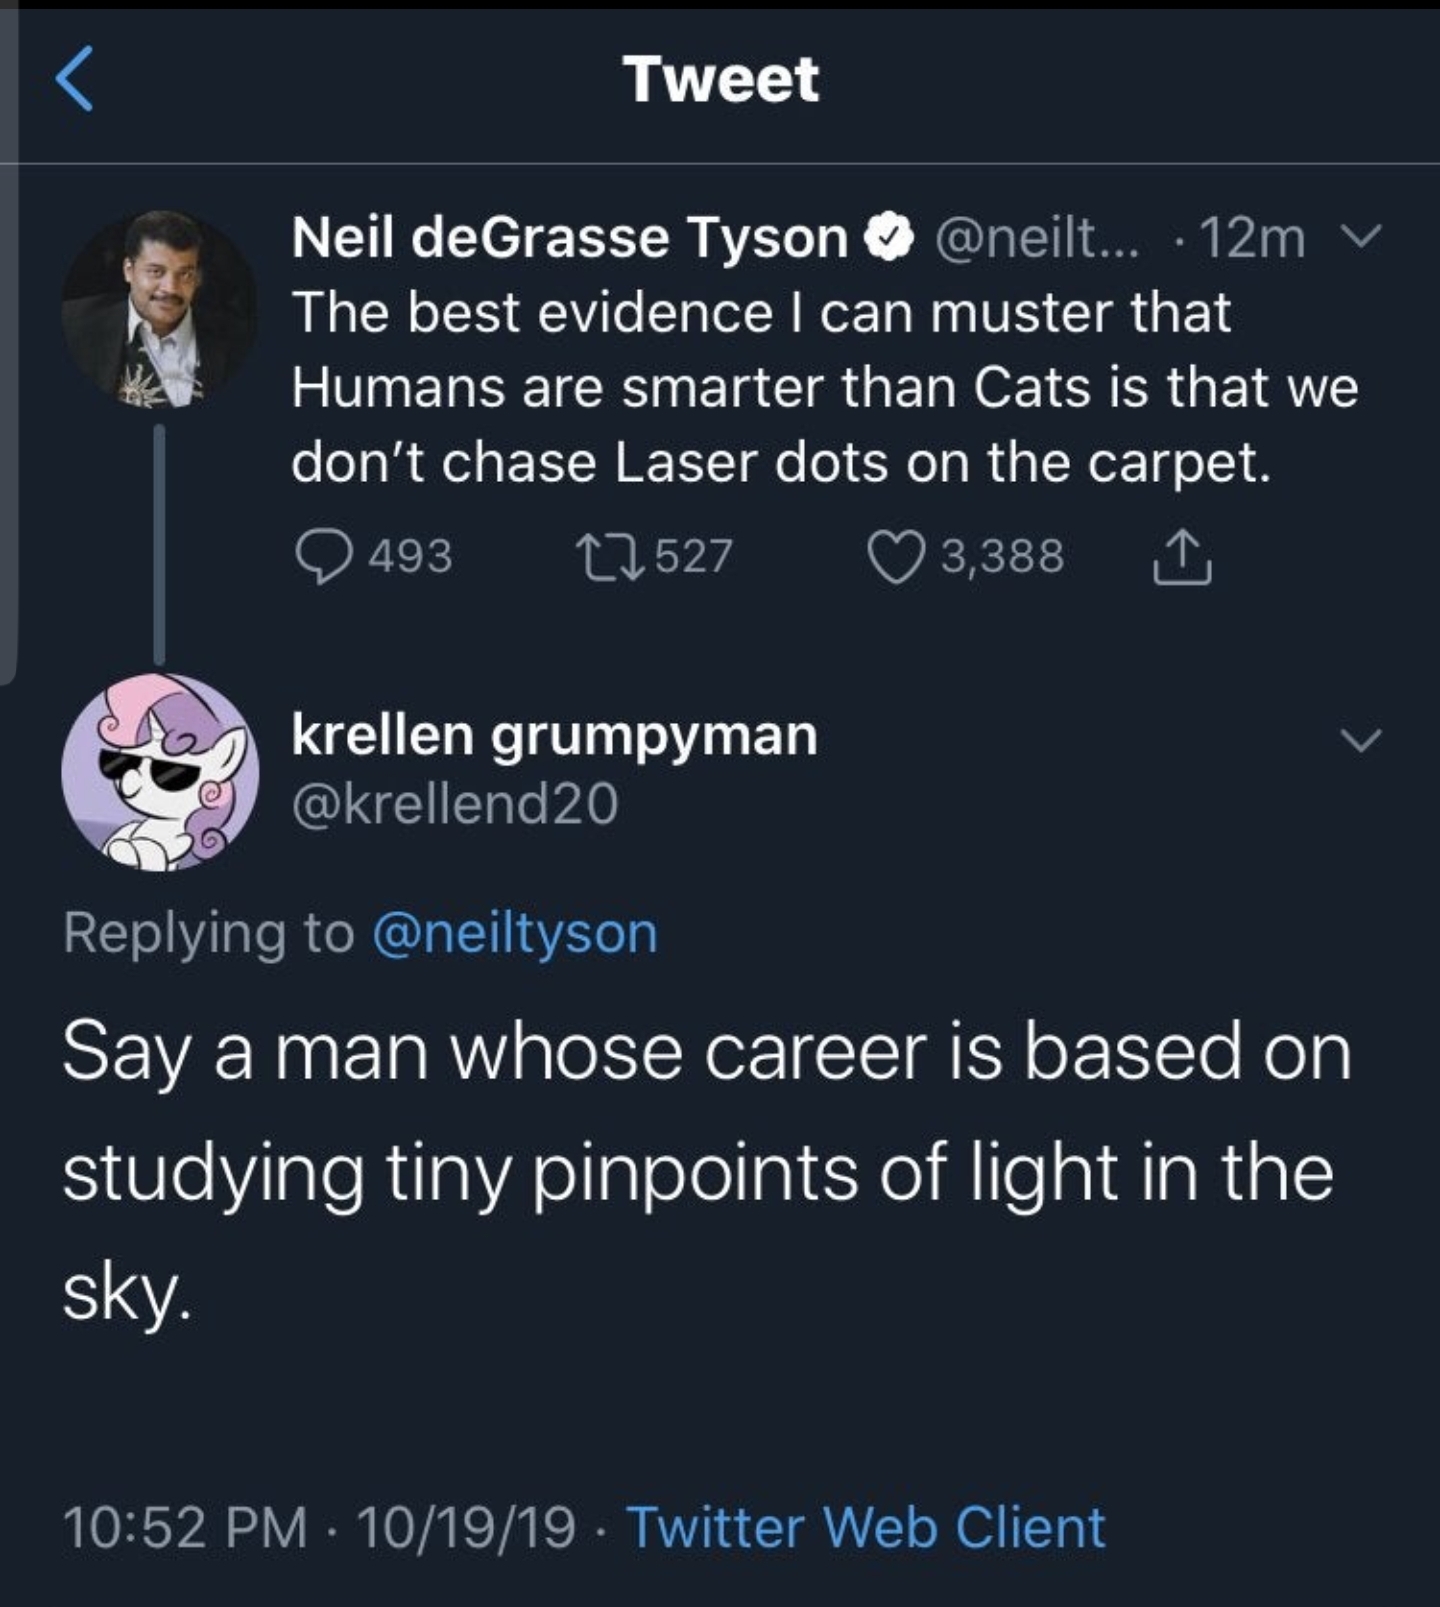 Tweet Neil deGrasse Tyson ... 12m v The best evidence I can muster that Humans are smarter than Cats is that we don't chase Laser dots on the carpet. 493 12527 3,388 1 krellen grumpyman Say a man whose career is based on studying tiny pinpoin